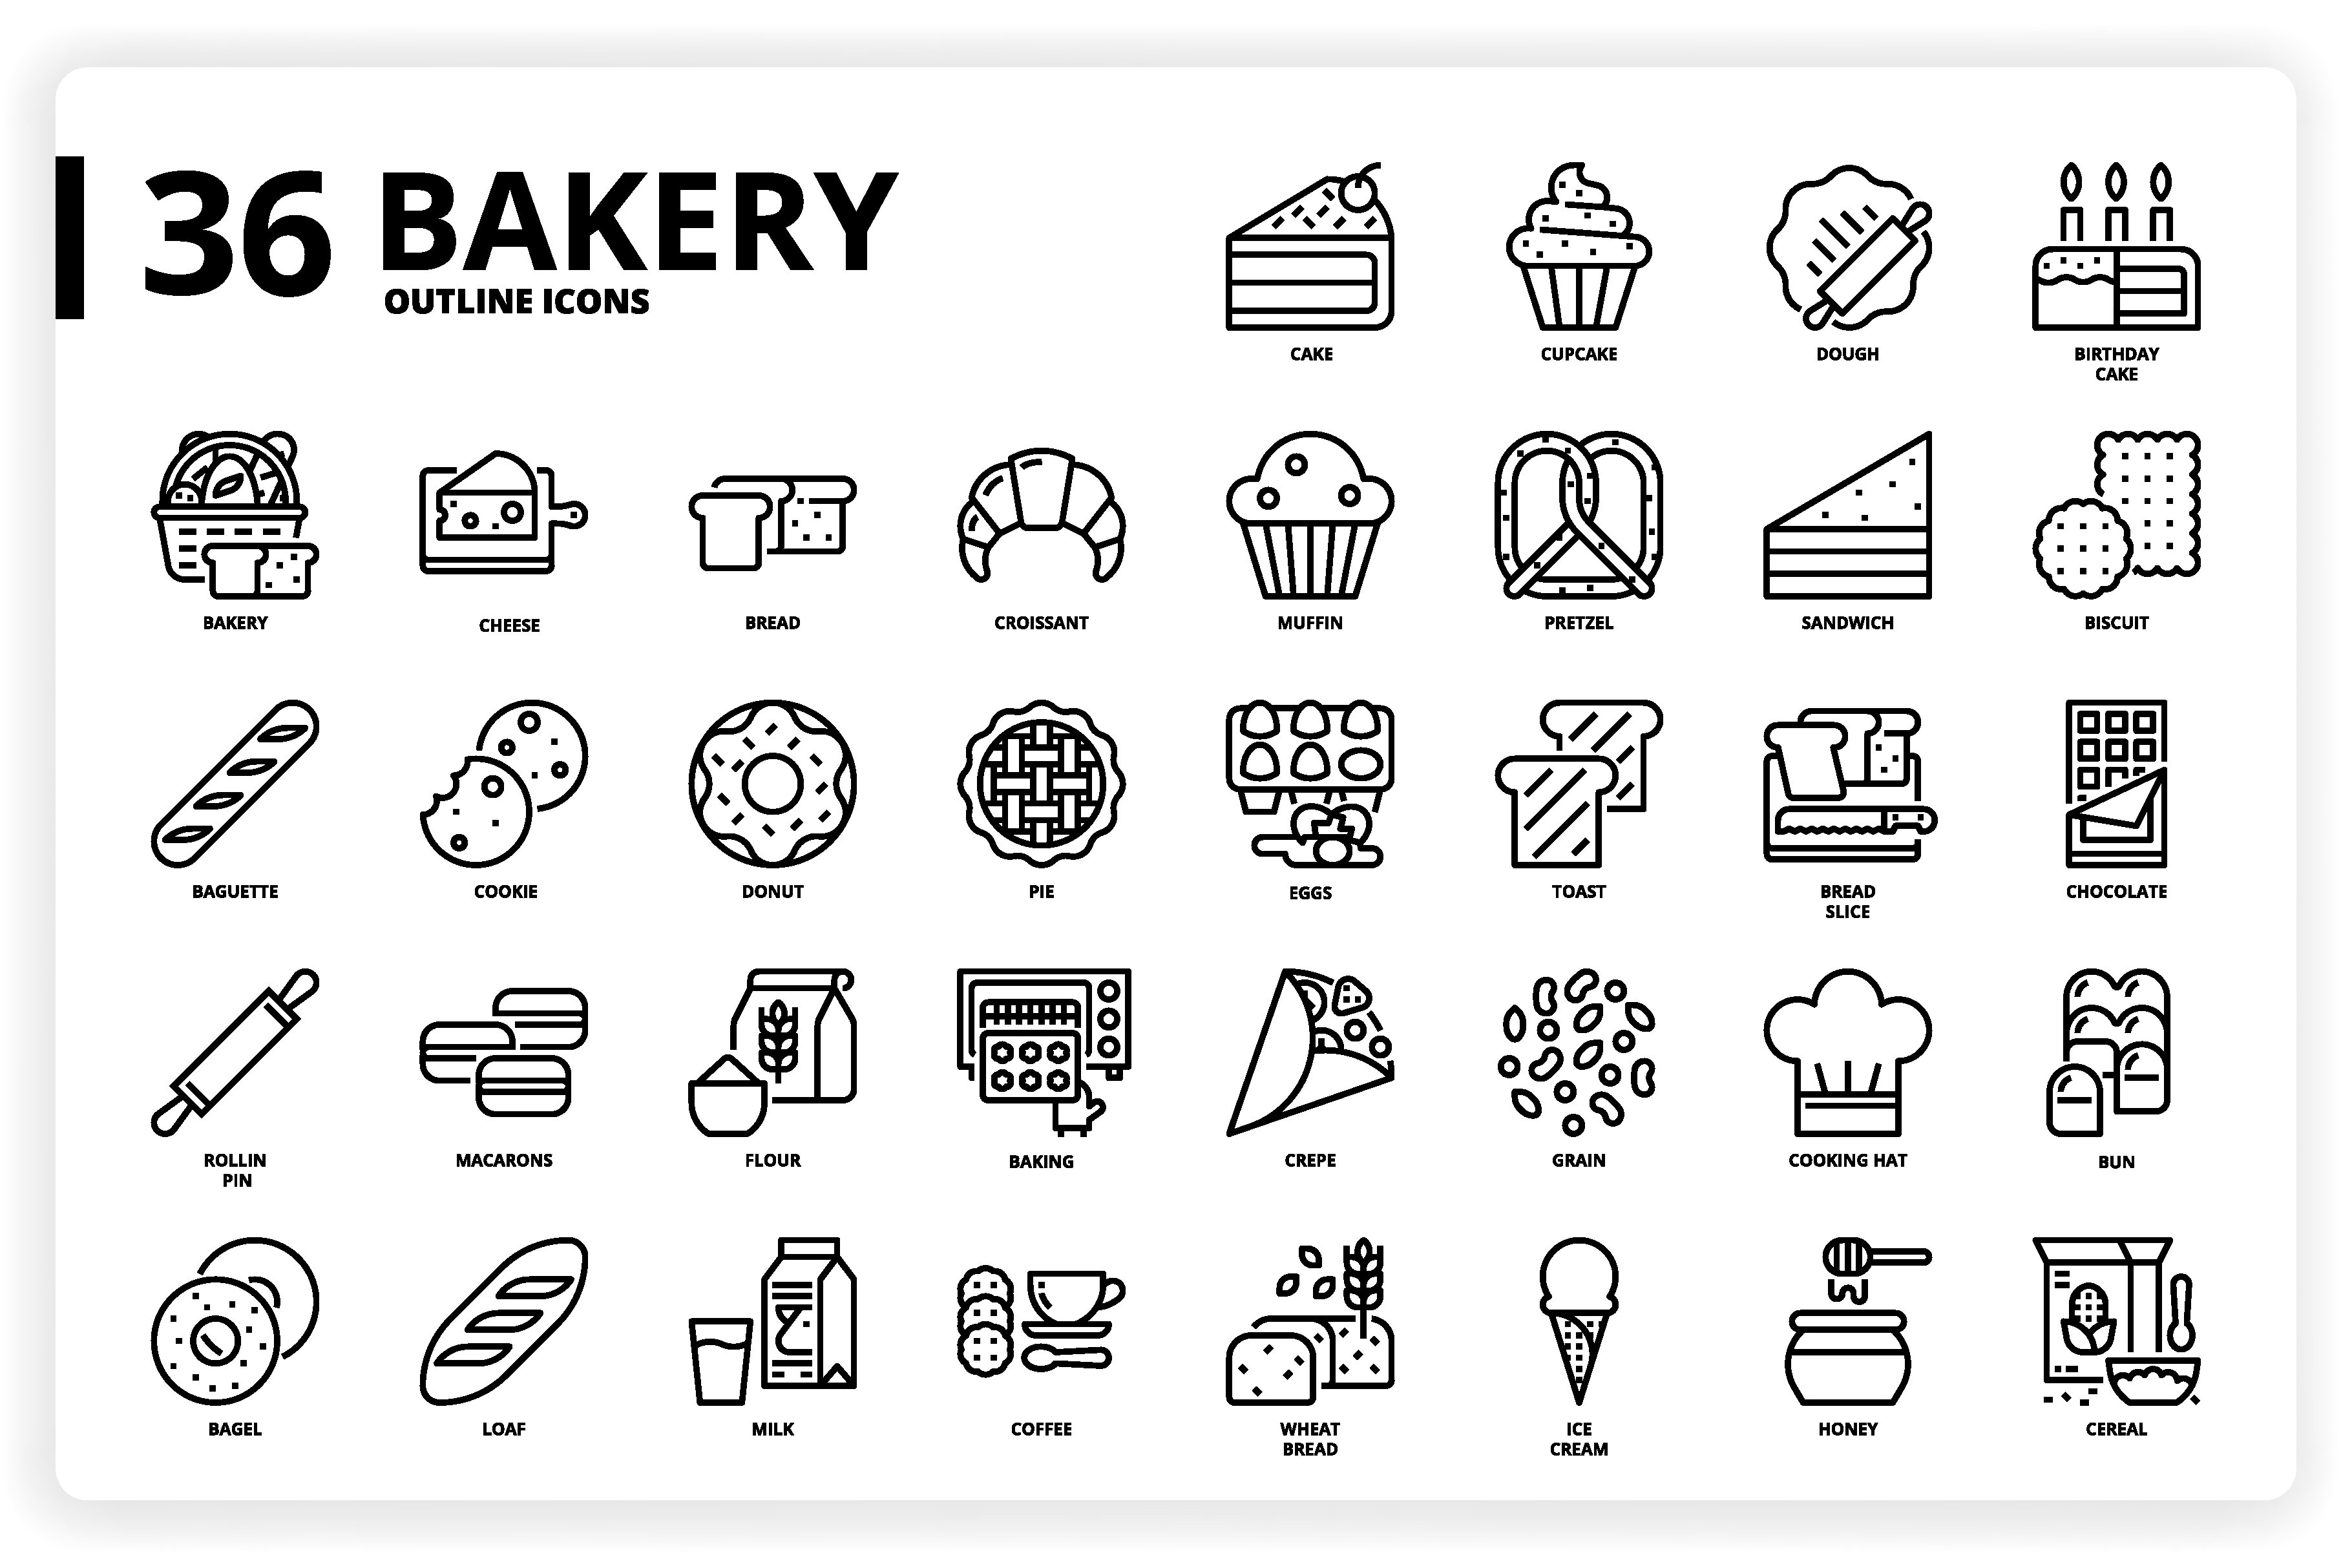 36 Bakery Icons x 3 Styles preview image.